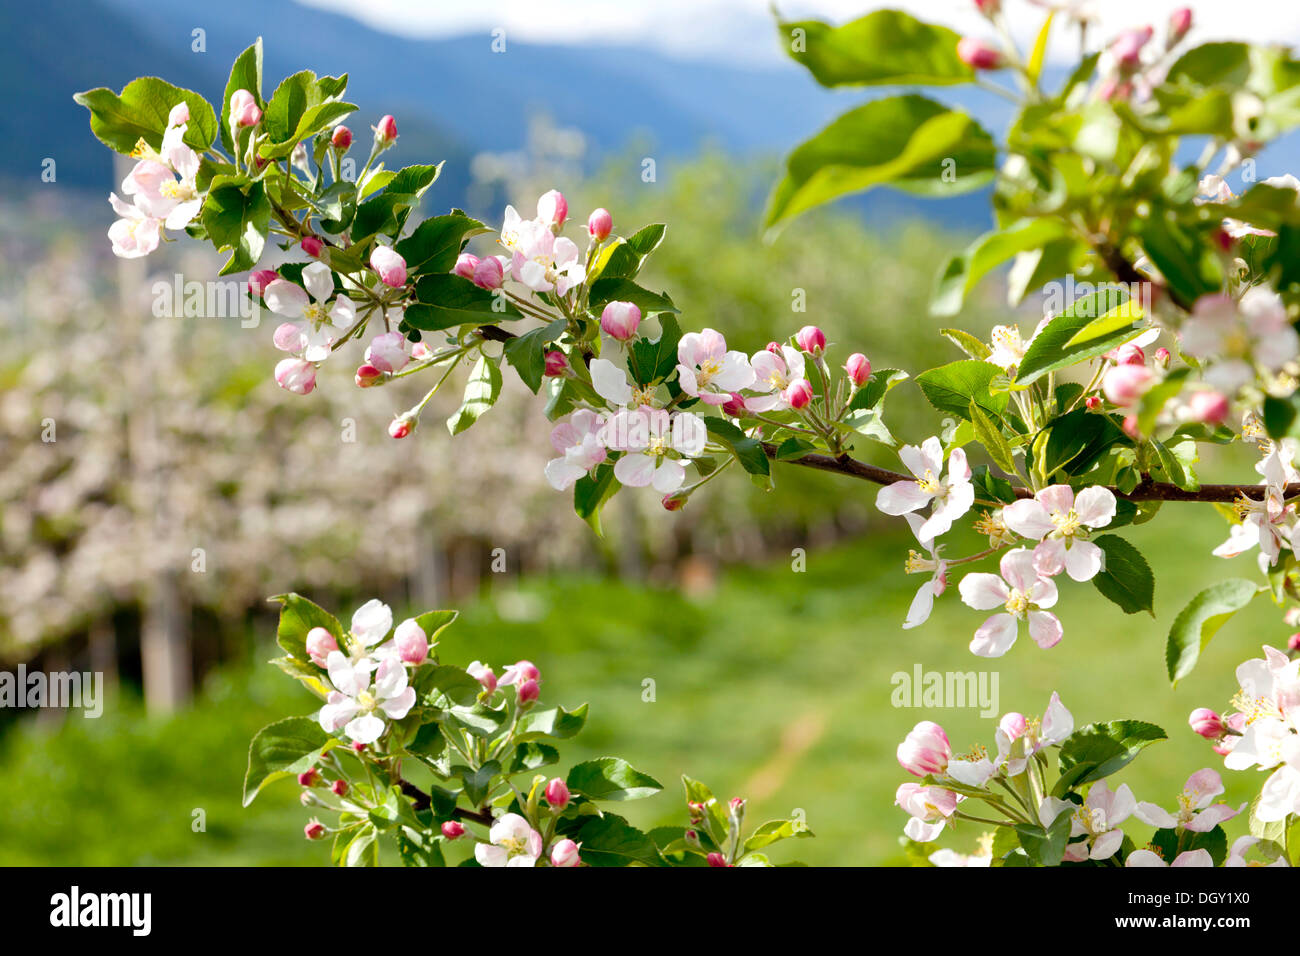 Apple blossoms in an apple tree orchard, bei Meran, South Tyrol province, Trentino-Alto Adige, Italy Stock Photo